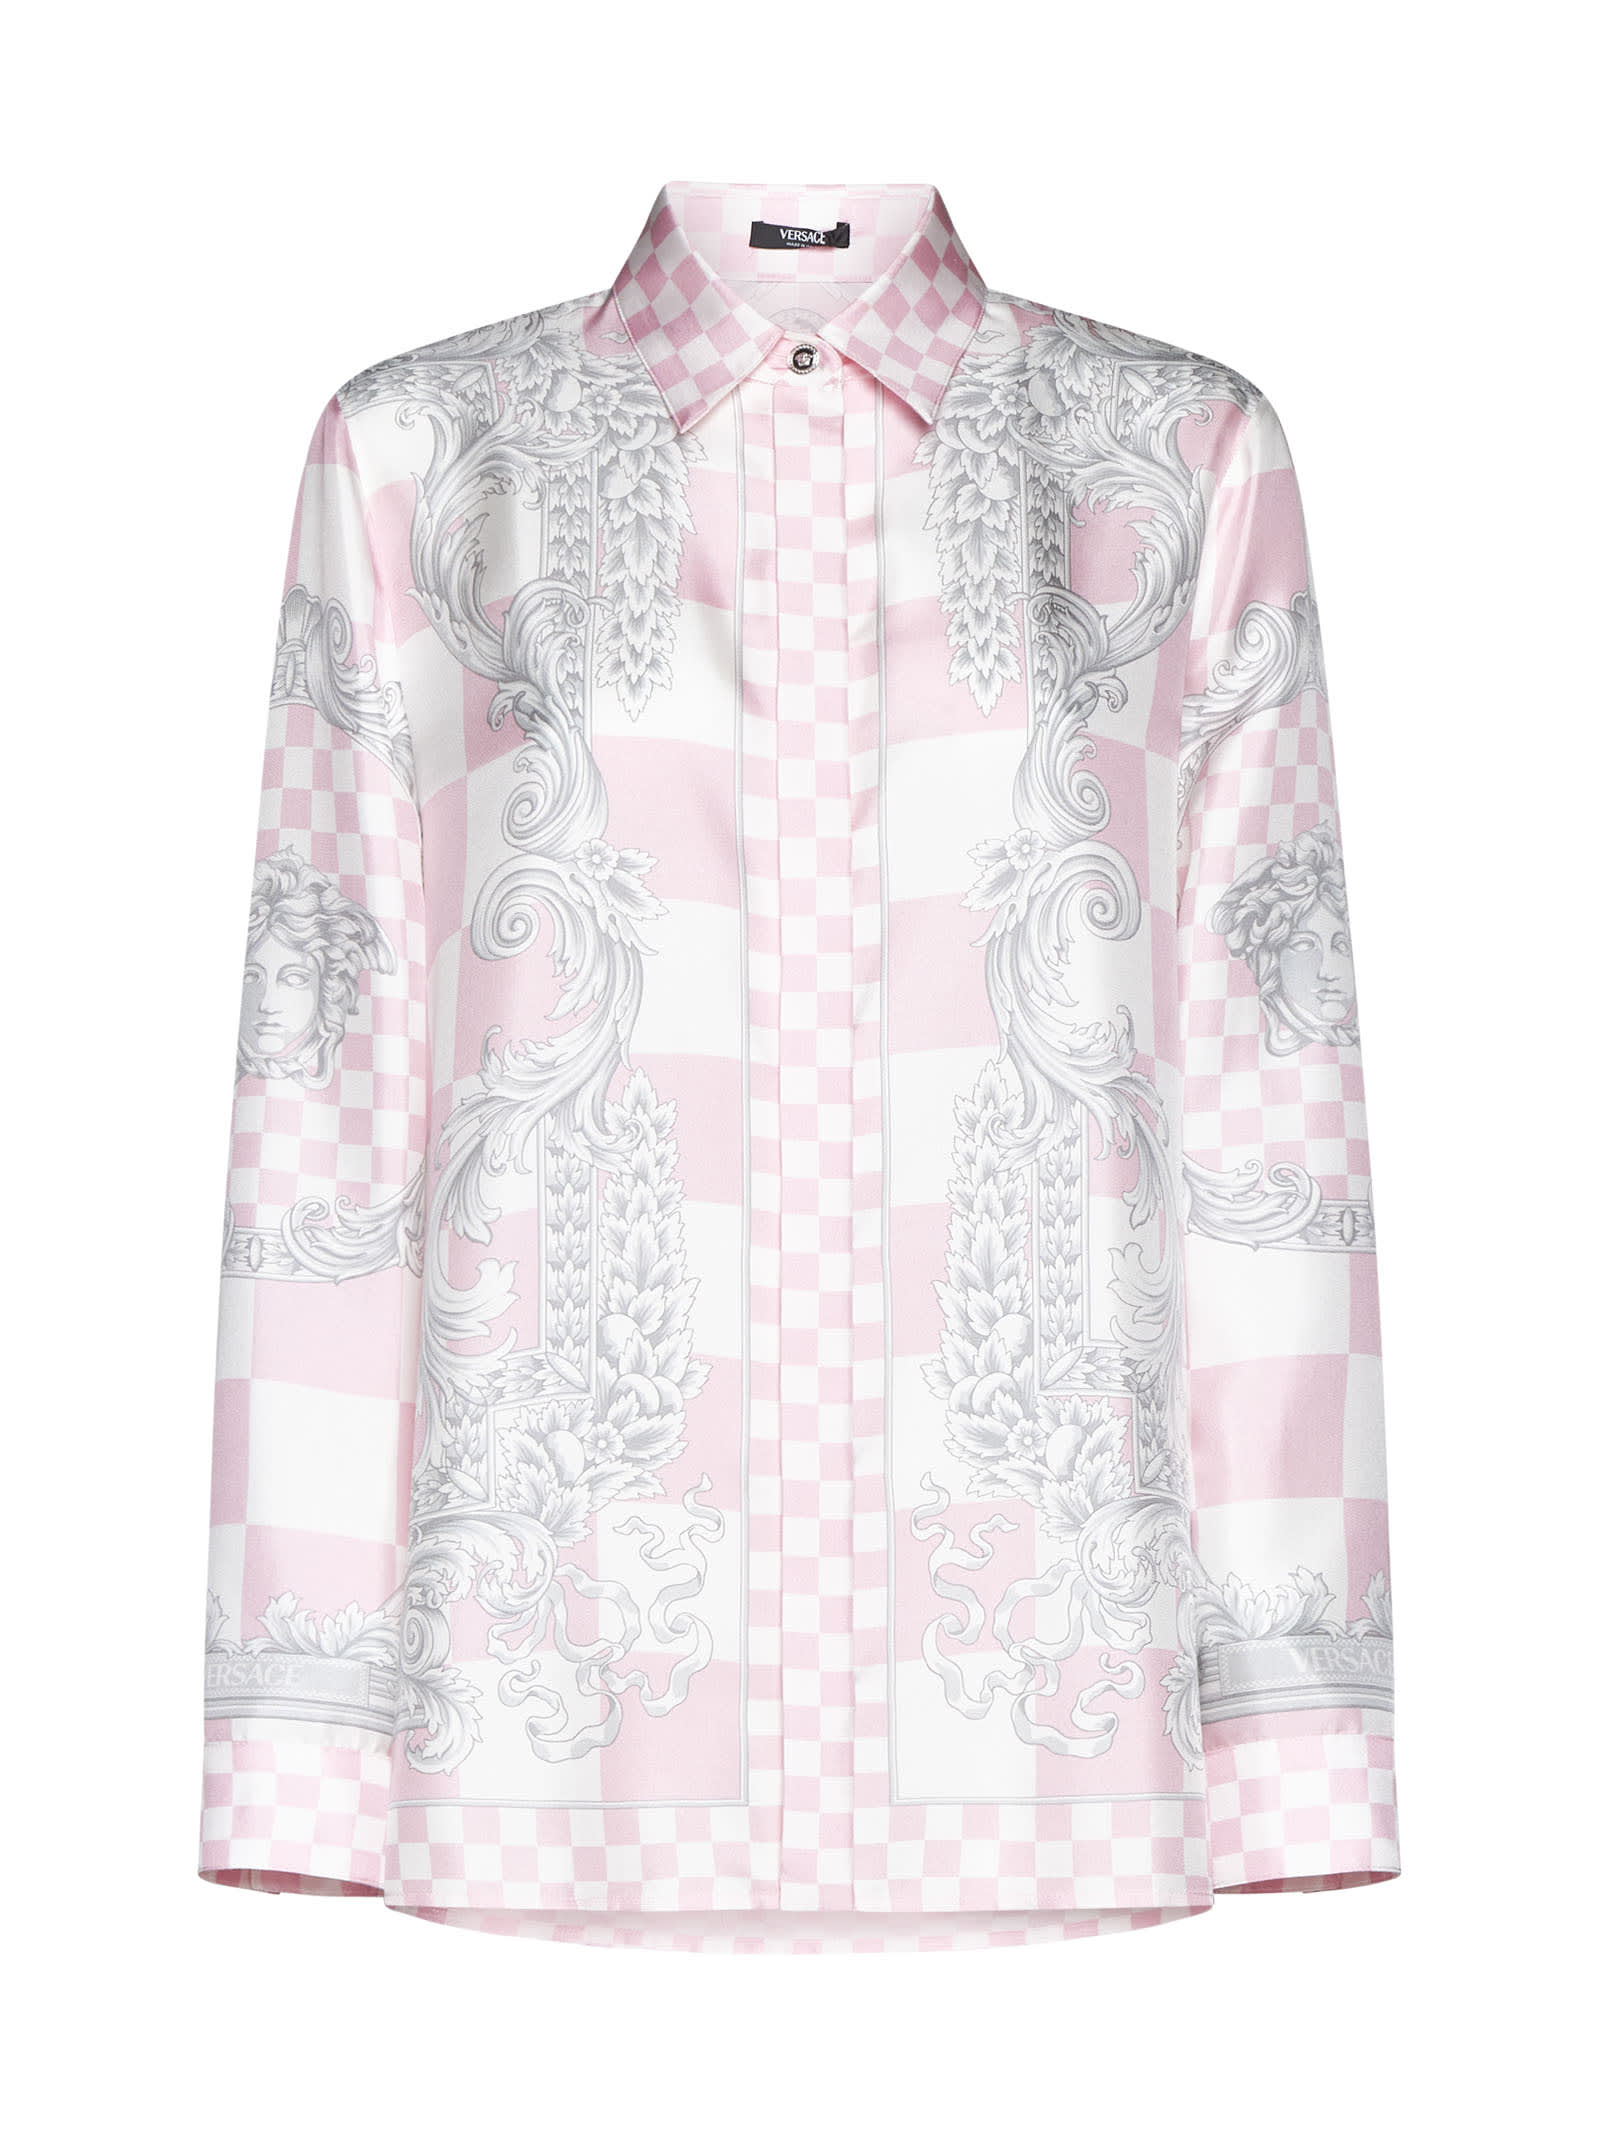 Shop Versace Shirt In Pastel Pink + White + Silver